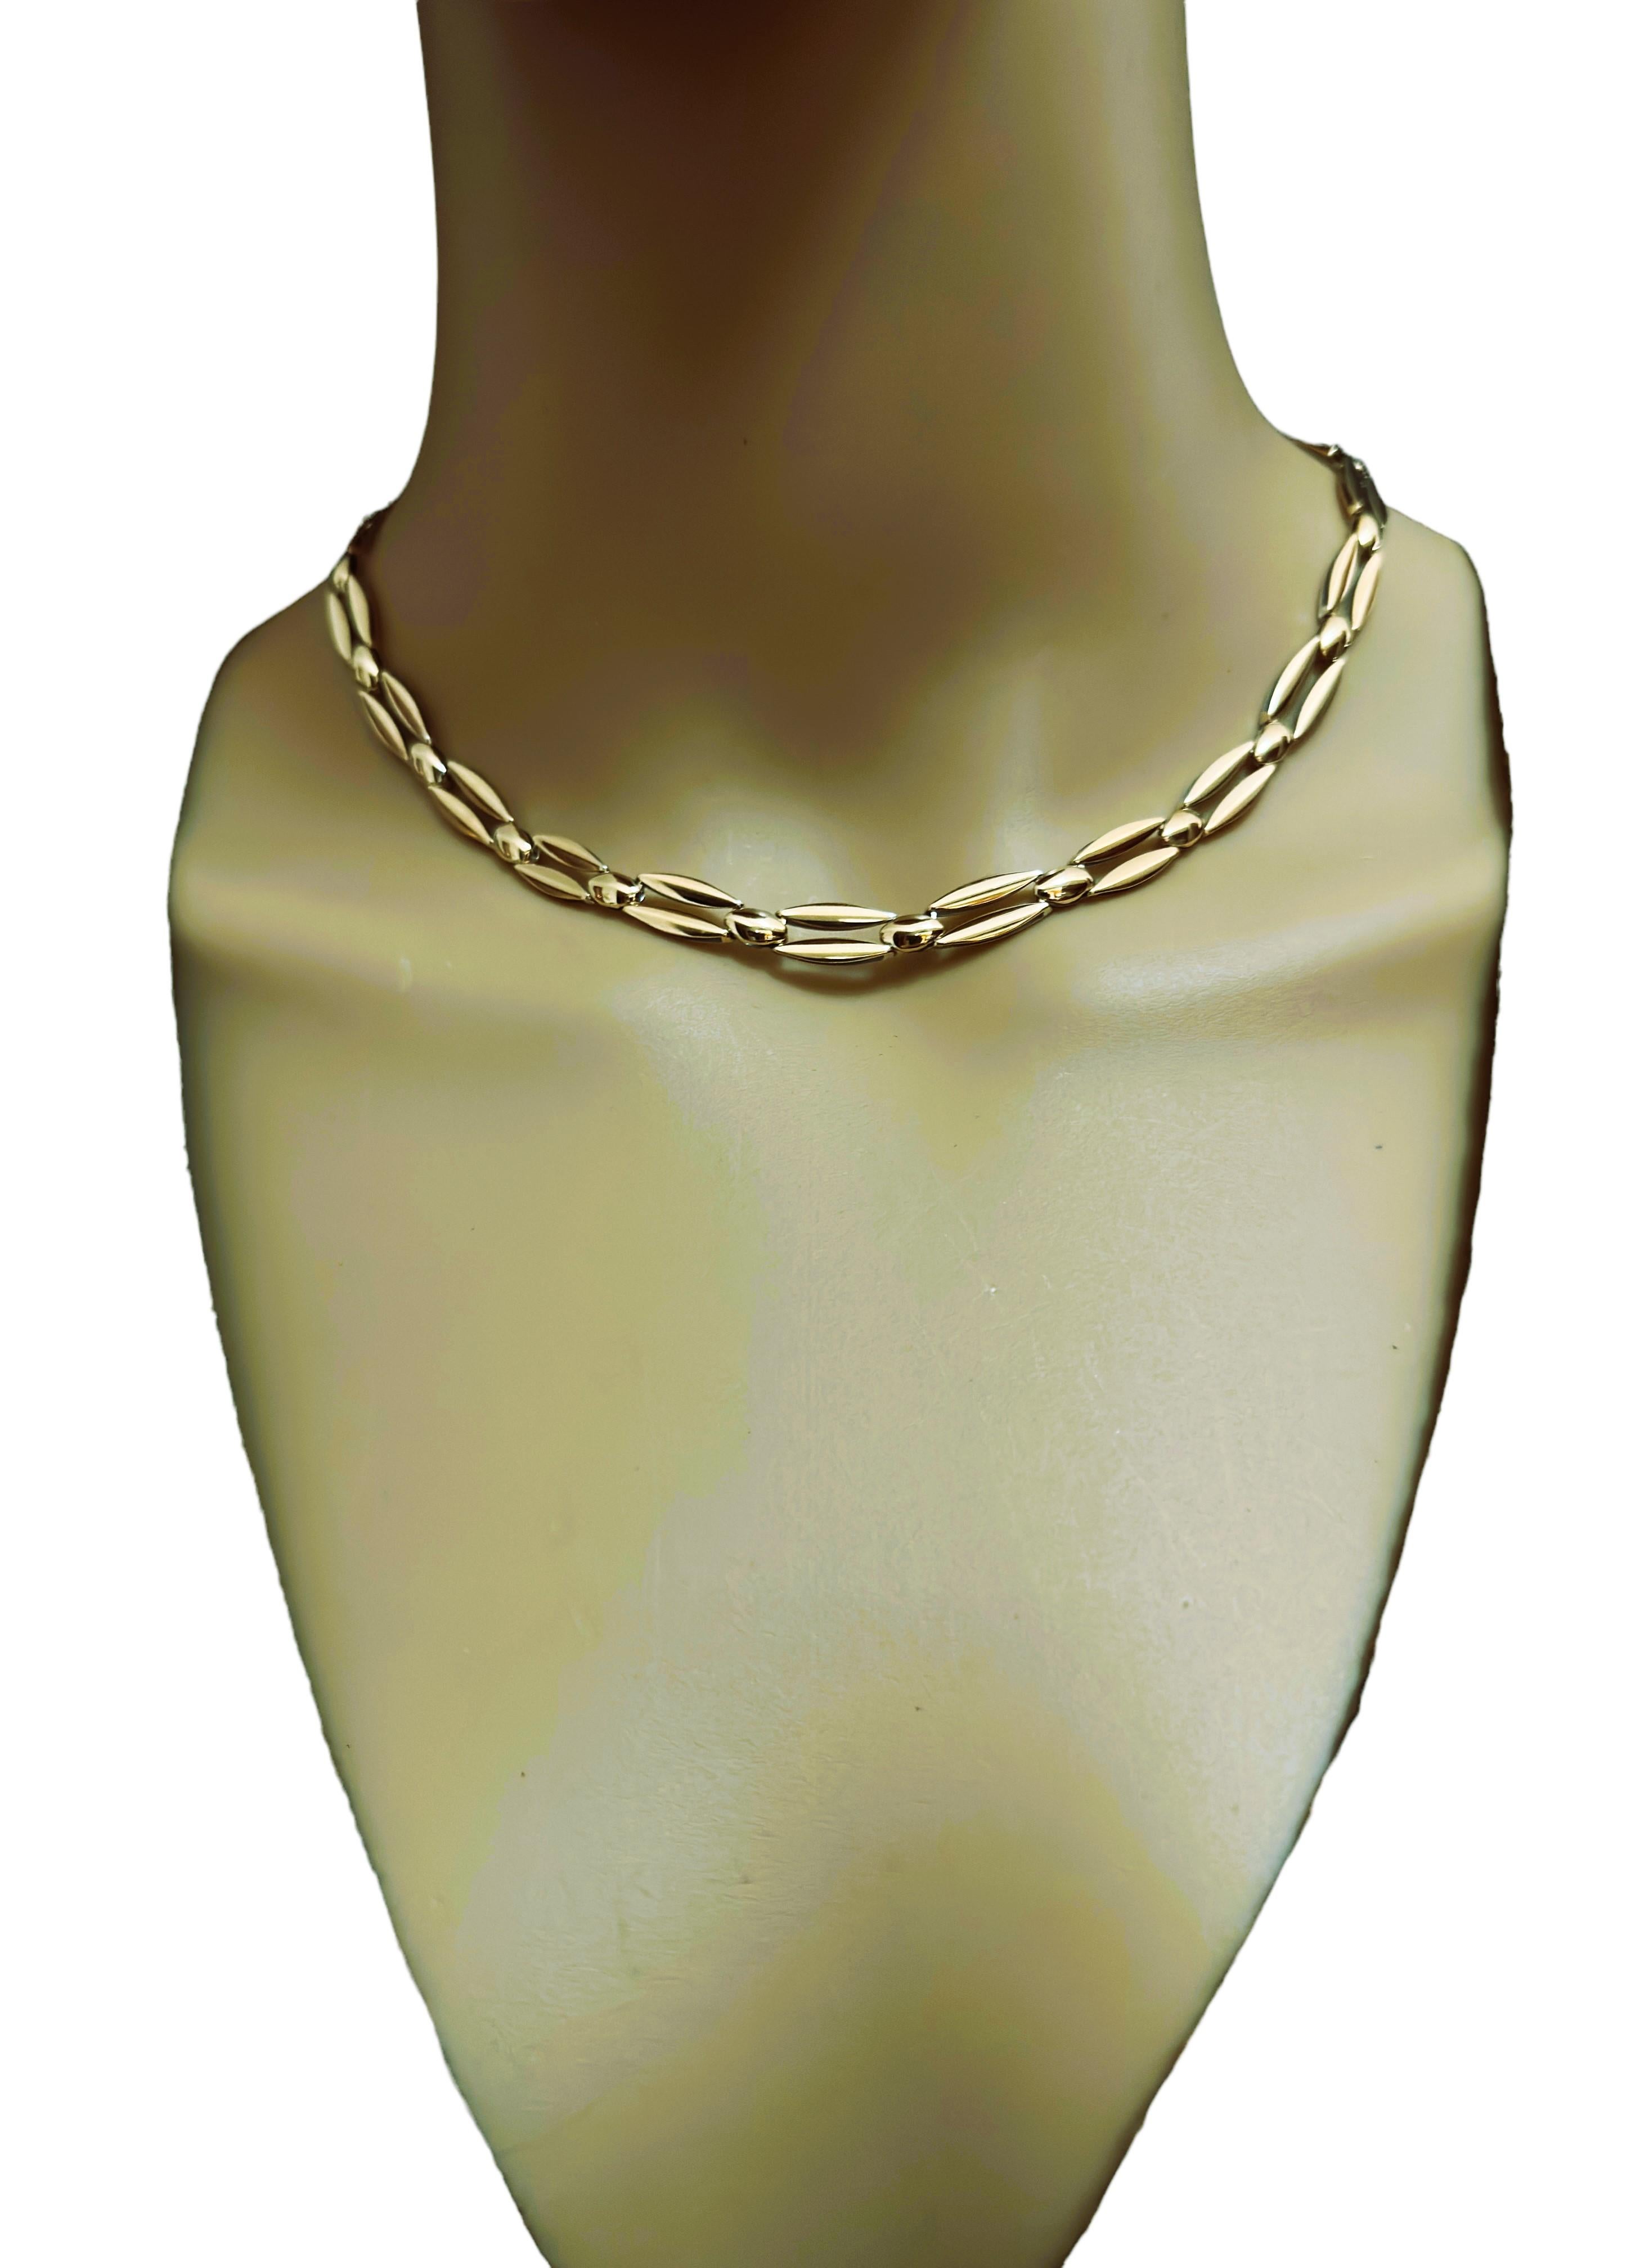 14k Yellow & White Gold Two-Tone Reversible Italian Unoaerre Necklace  In Excellent Condition For Sale In Eagan, MN